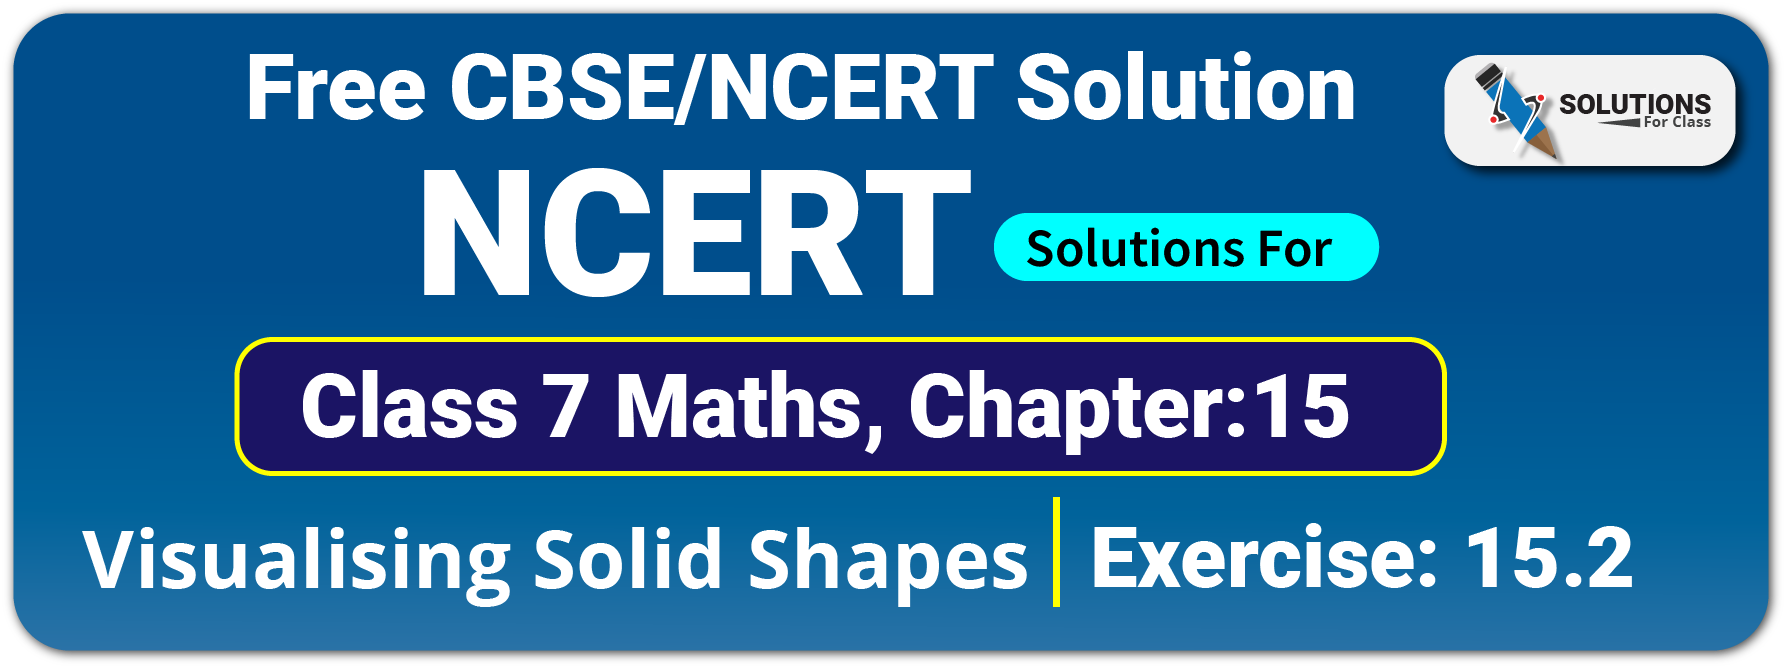 NCERT Solutions For Class 7 Maths Chapter 15 Visulising Solid Shapes Exercise 15.2